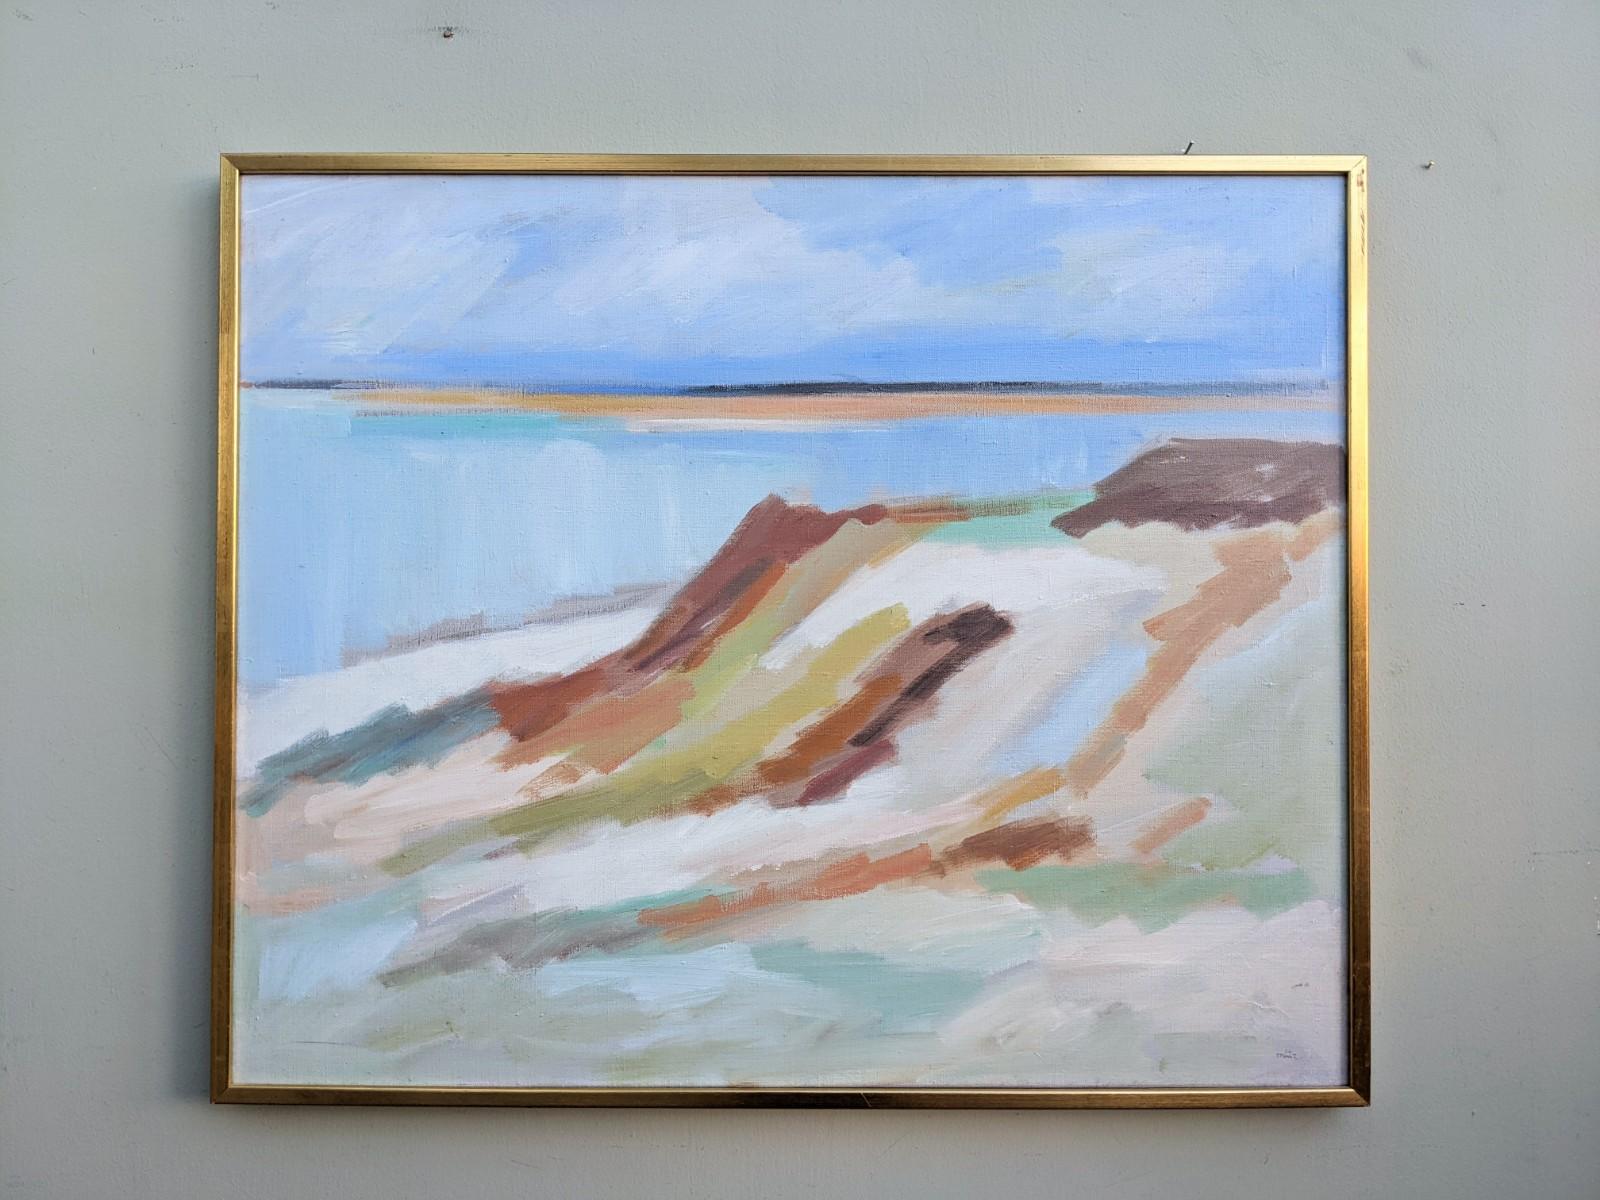 Unknown Landscape Painting - Mid-Century Modern Swedish "The Gentle Coast" Vintage Oil Painting, Seascape